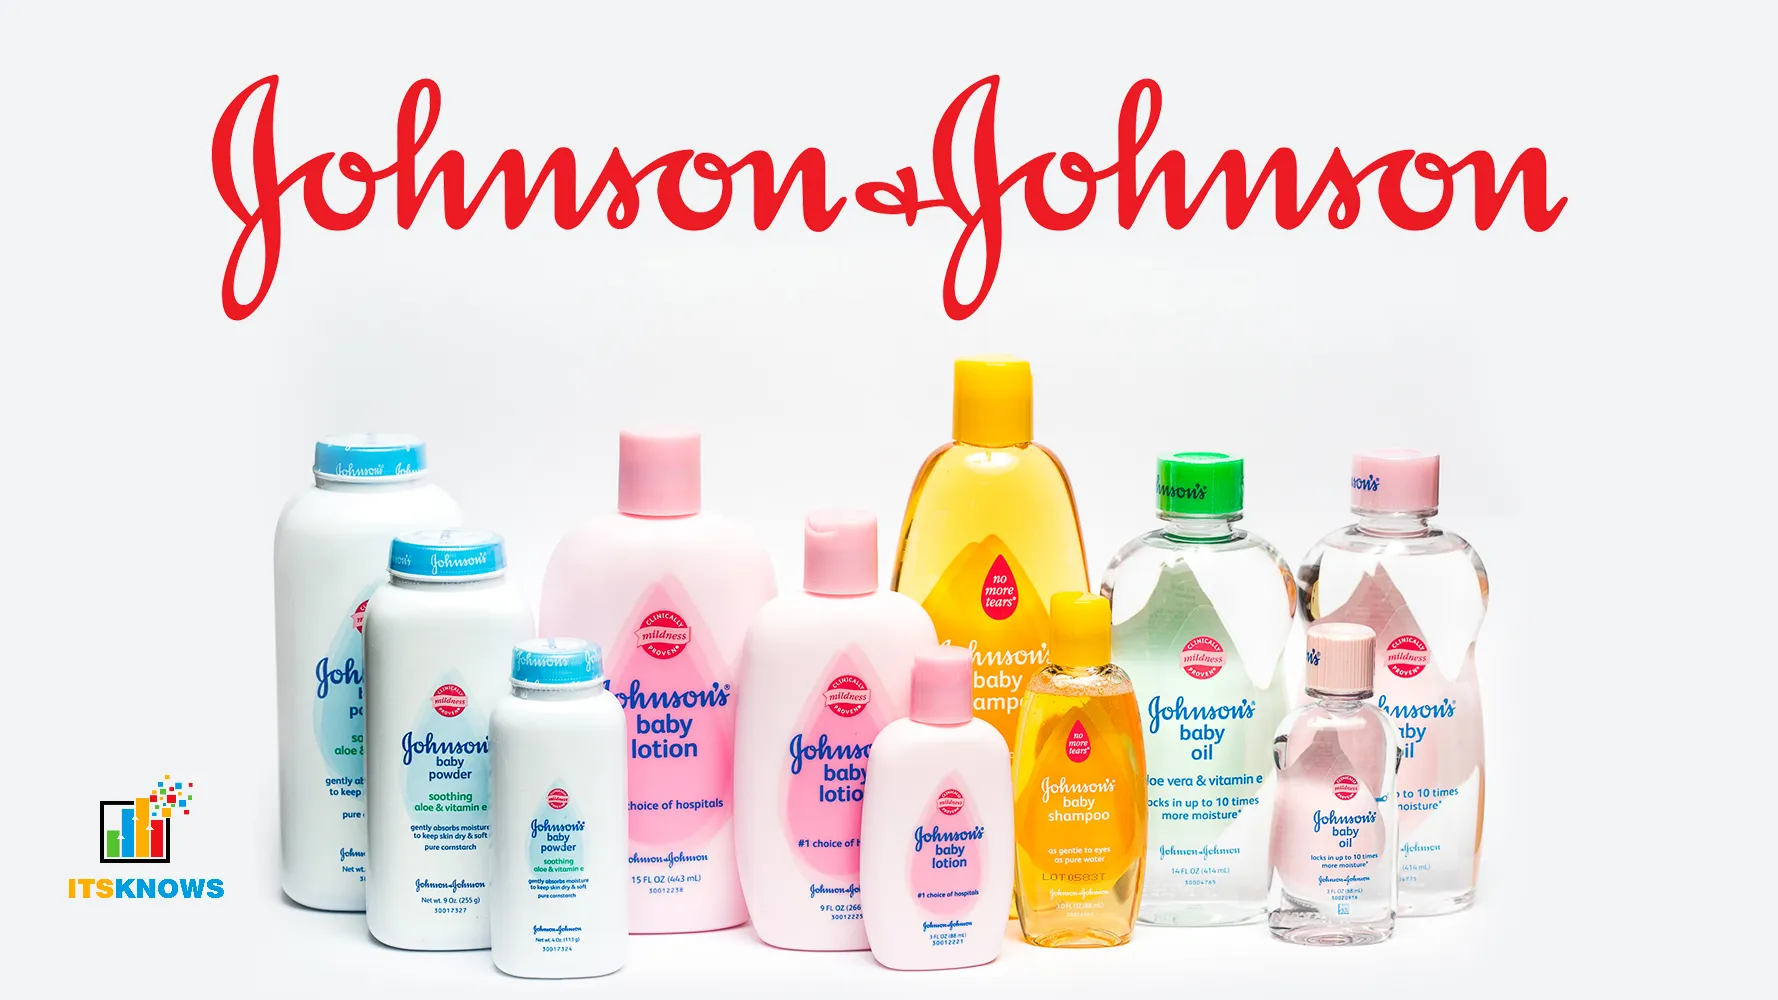 Who Owns Johnson and Johnson